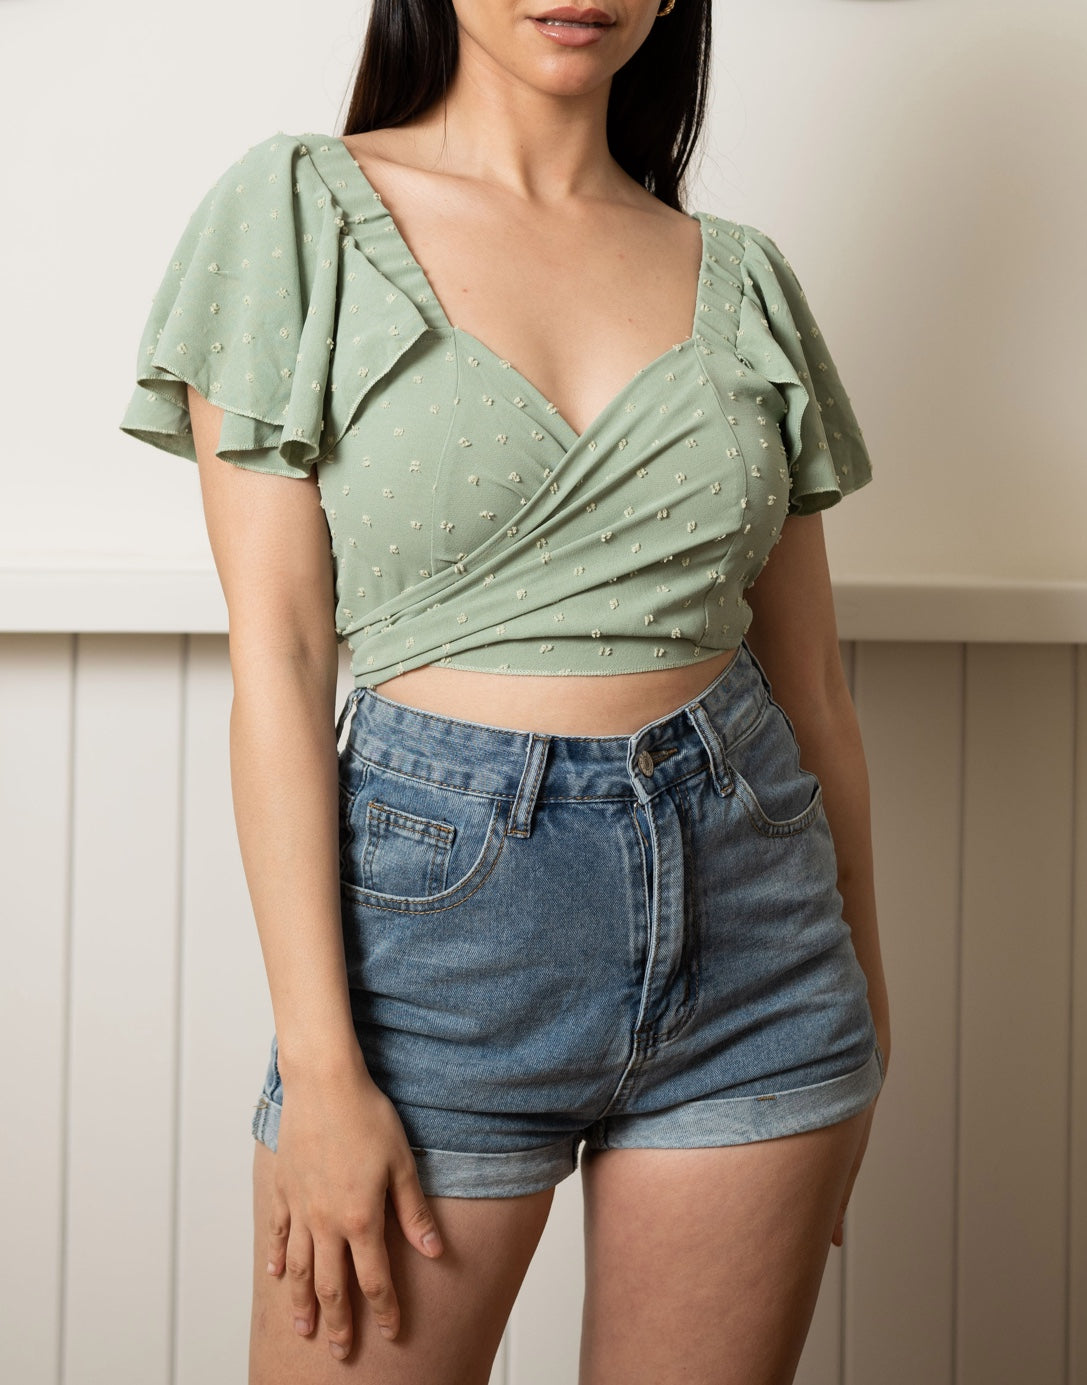 Sweetheart Neck Wrap Crop Top Sewing Pattern – Patterns For Less